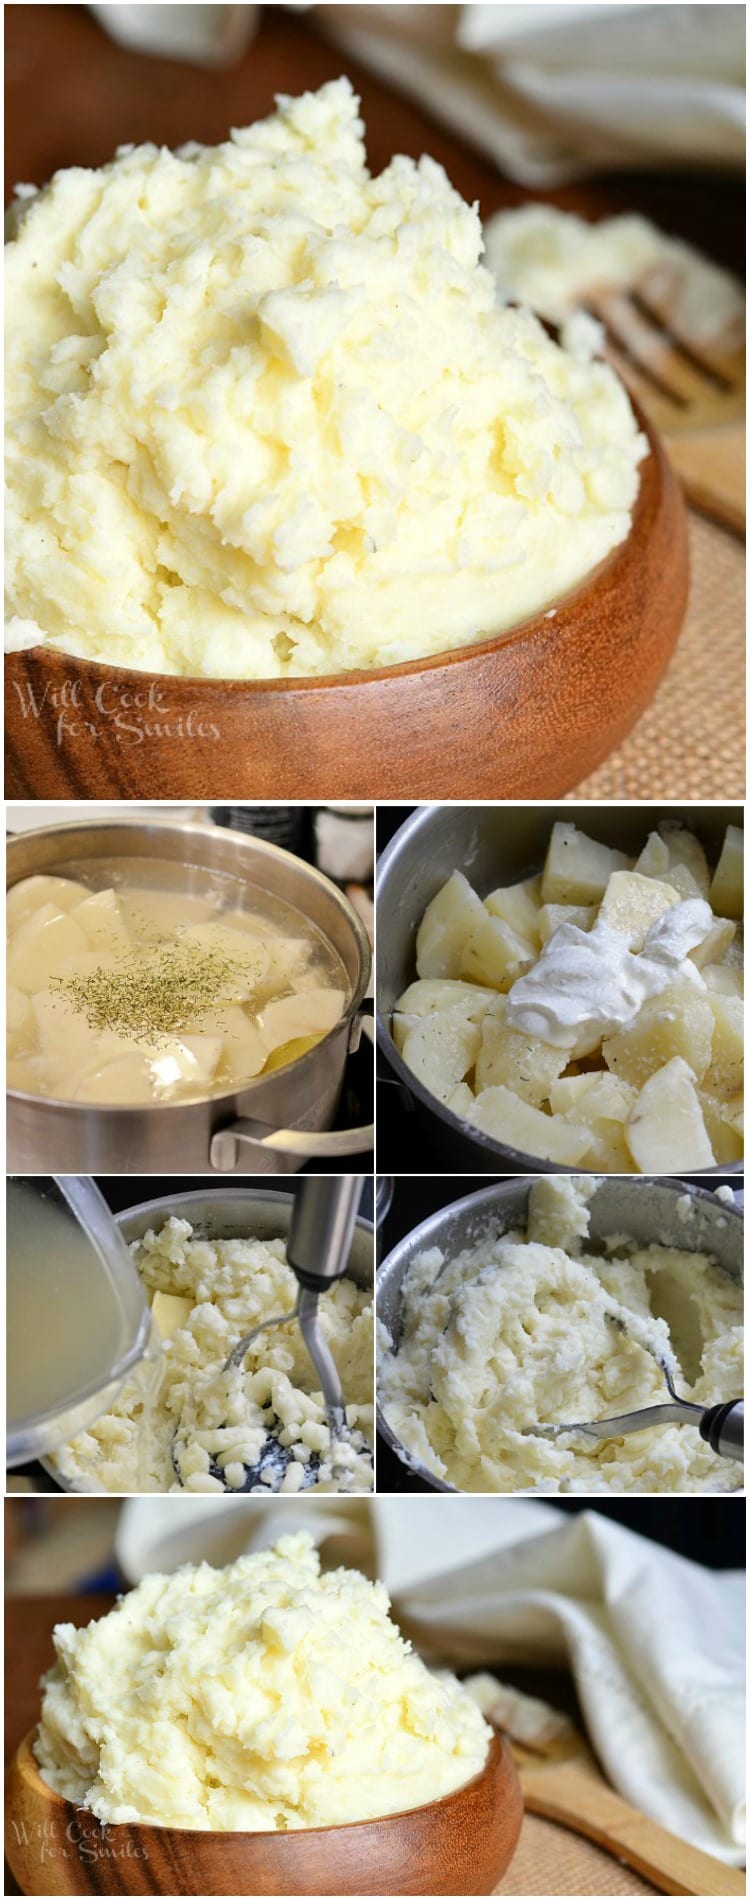 Perfect Mashed Potatoes Recipe collage potatoes in a bowl, potatoes being boiled, potatoes with butter and sour cream, potatoes being mashed, mashed potatoes, and potatoes in wood bowl 